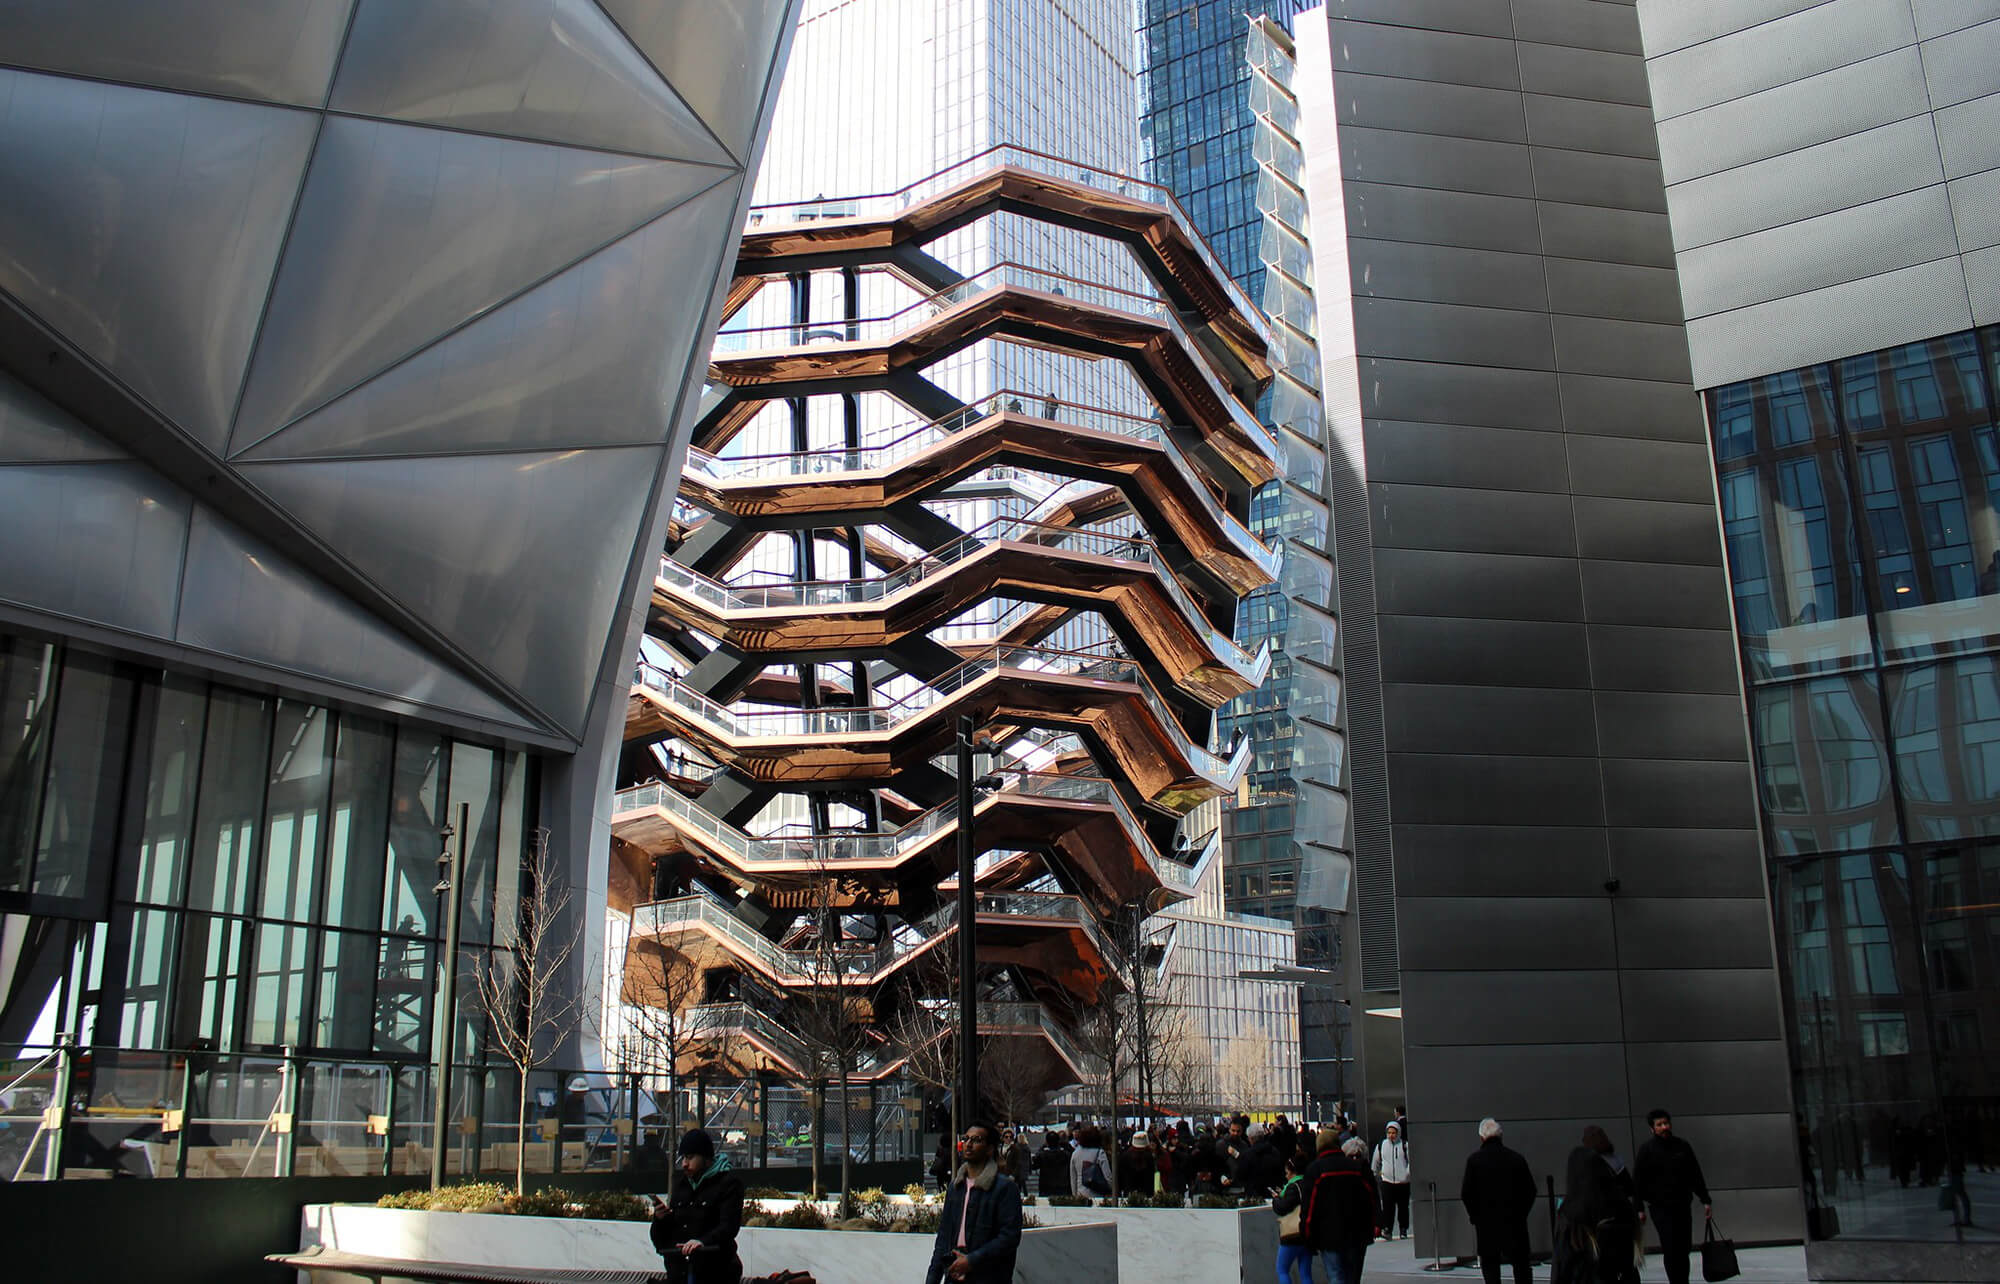 The Vessel to reopen in Hudson Yards replete with new safety nets for suicide prevention